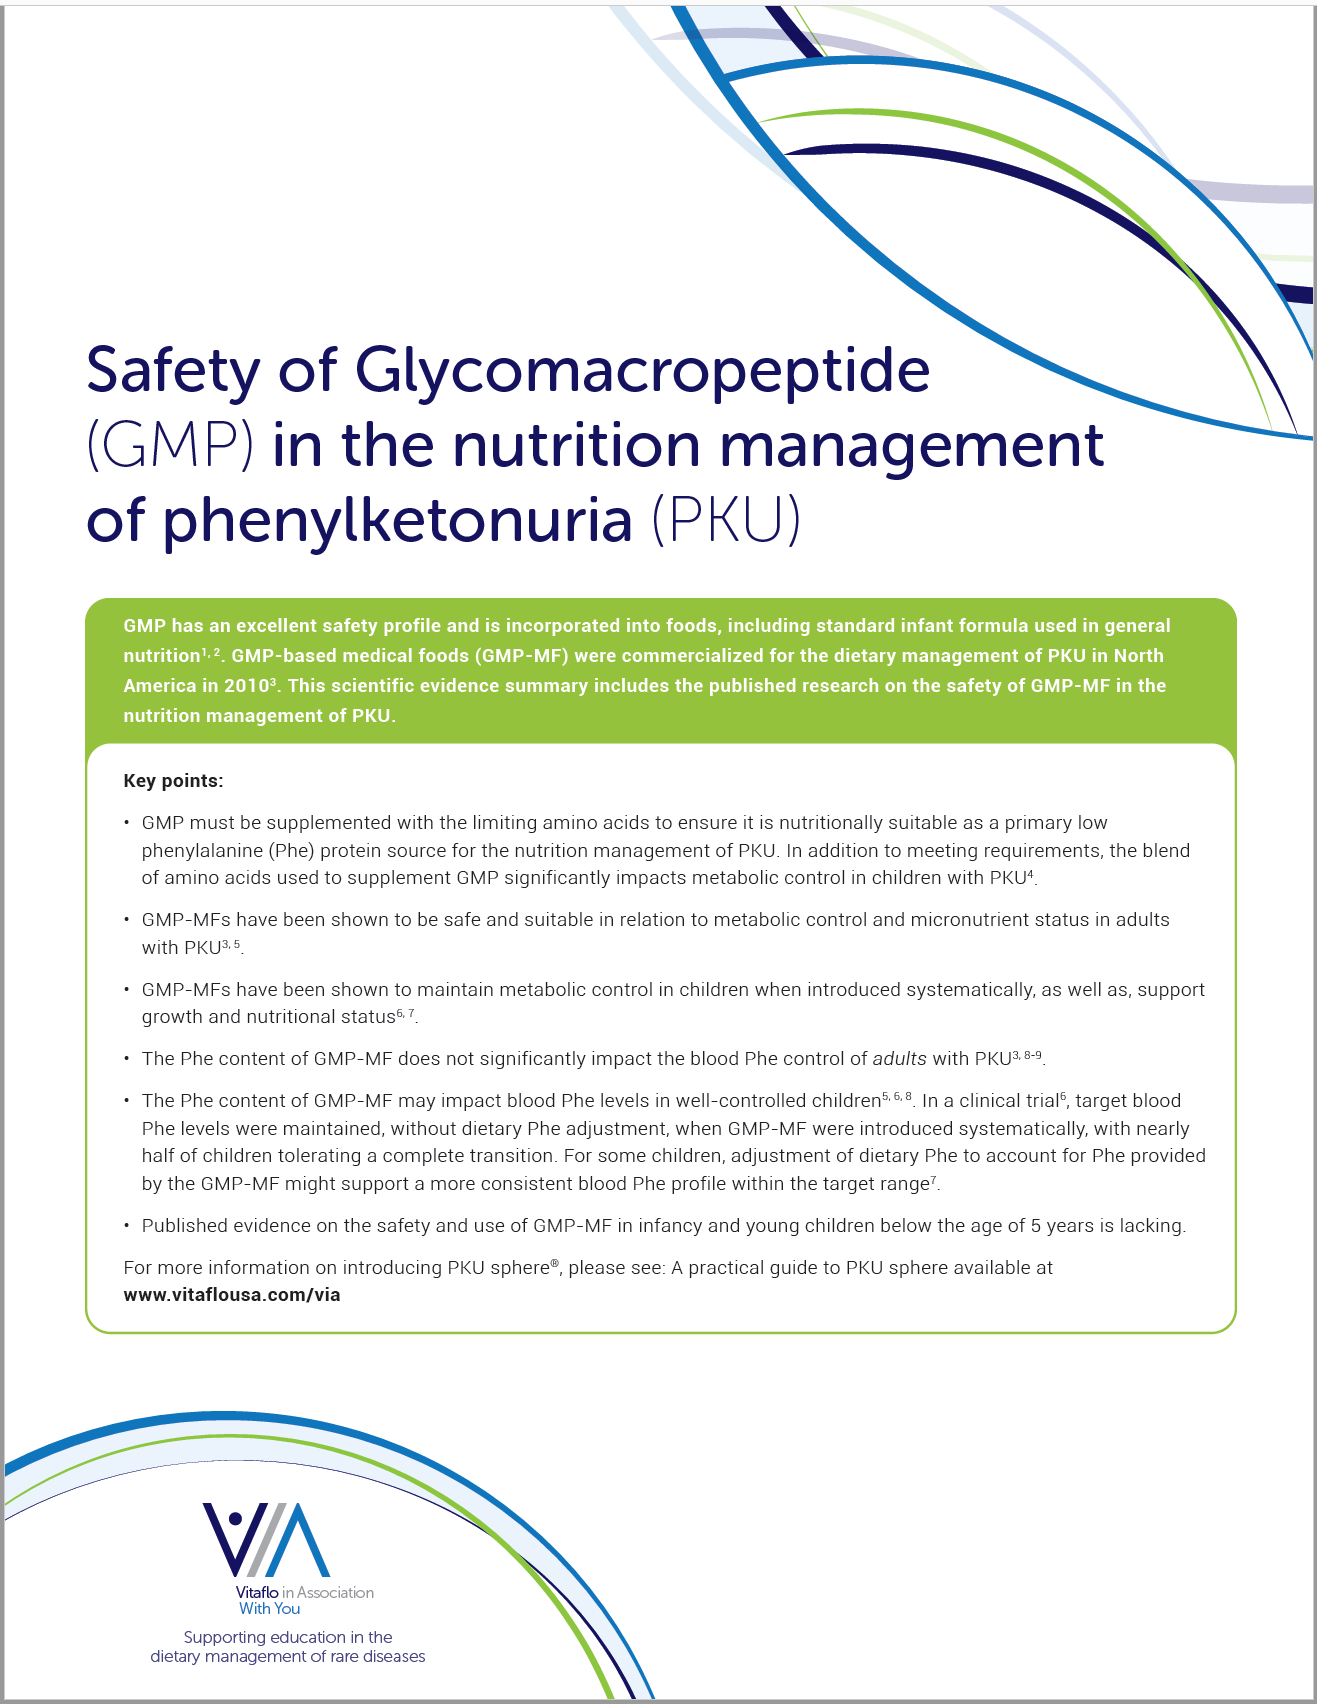 GMP safety in PKU research summary